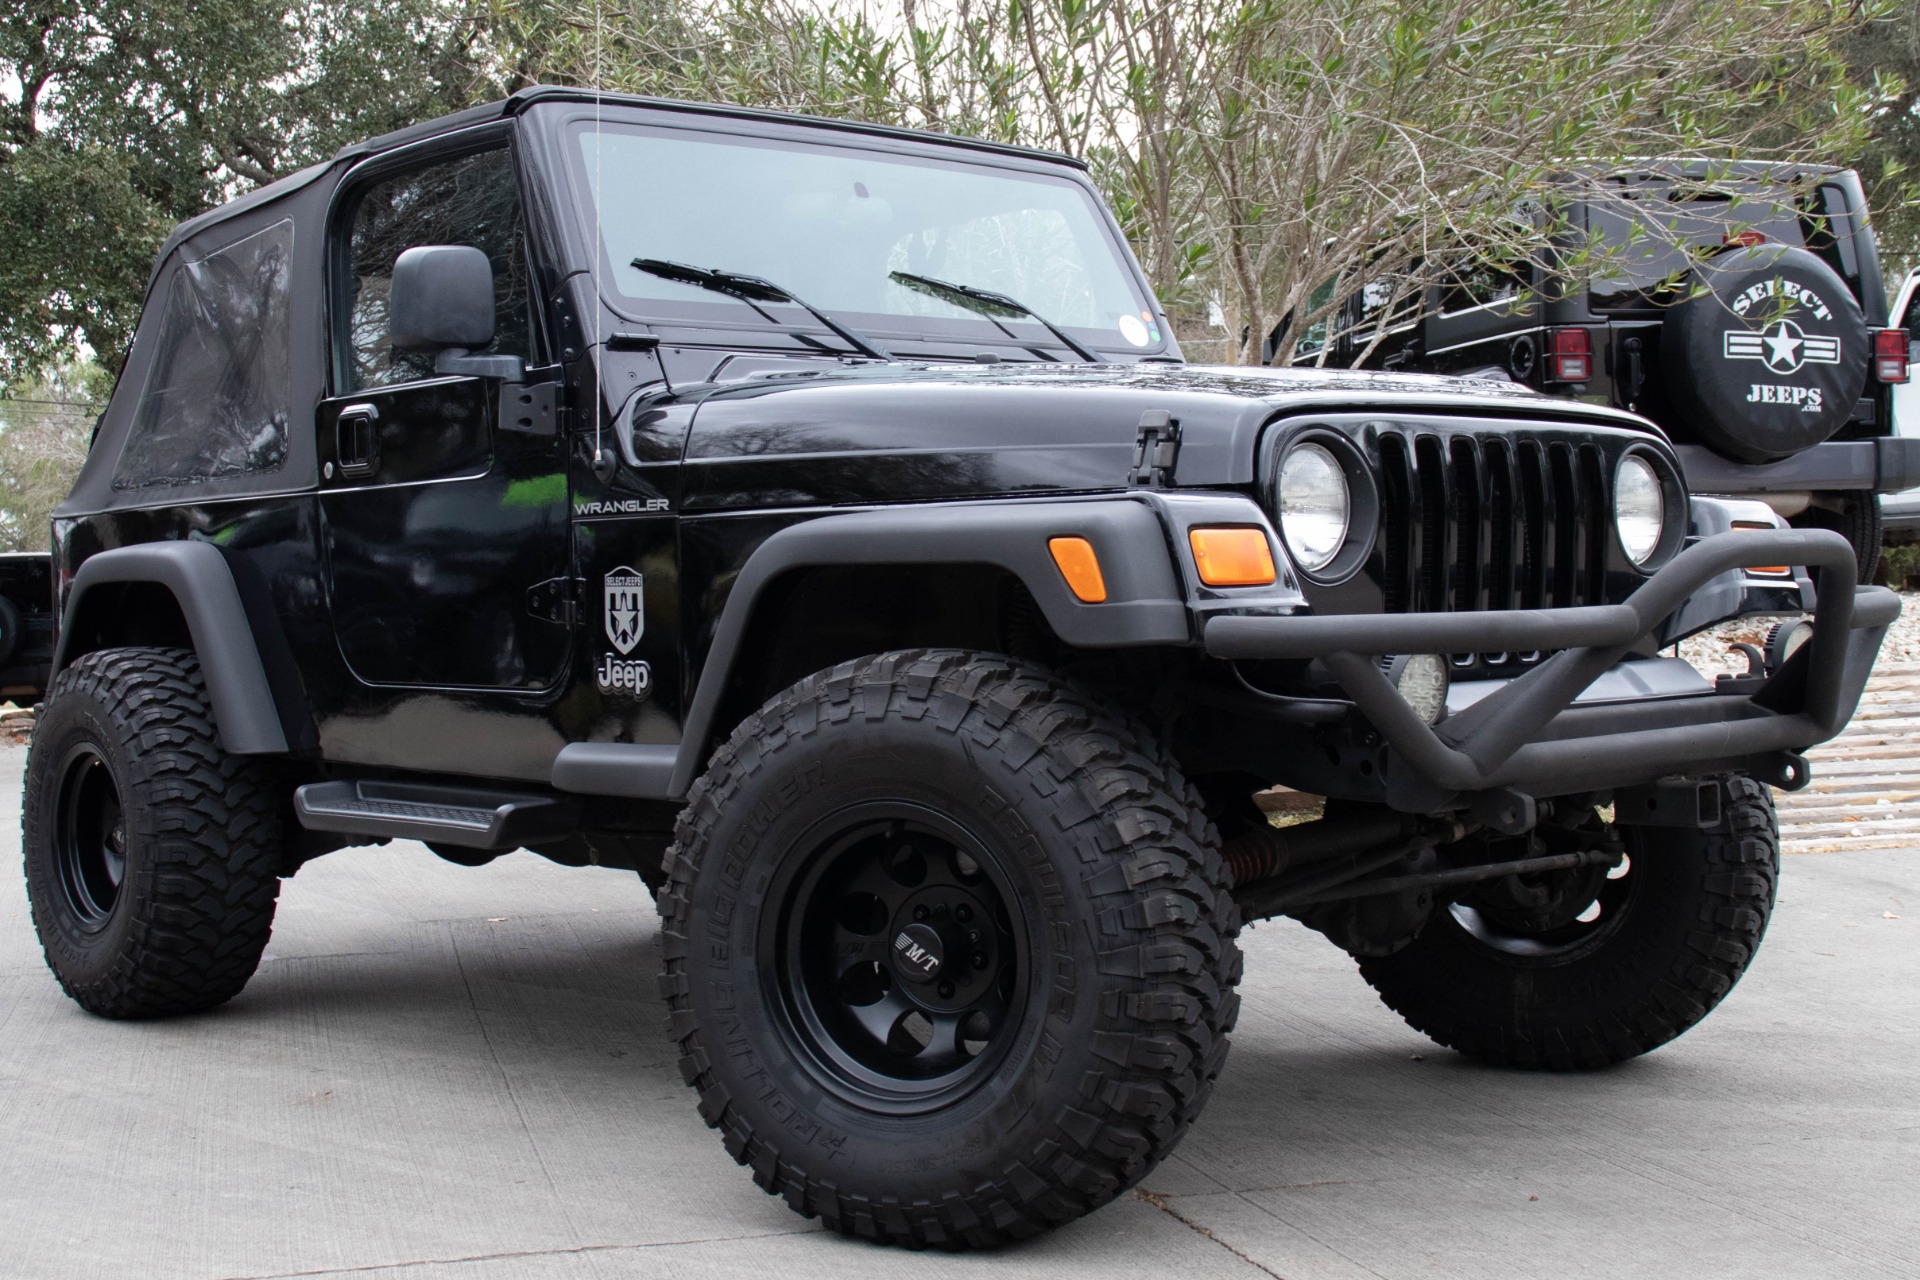 Used 2006 Jeep Wrangler Unlimited For Sale ($16,995) | Select Jeeps Inc.  Stock #700852